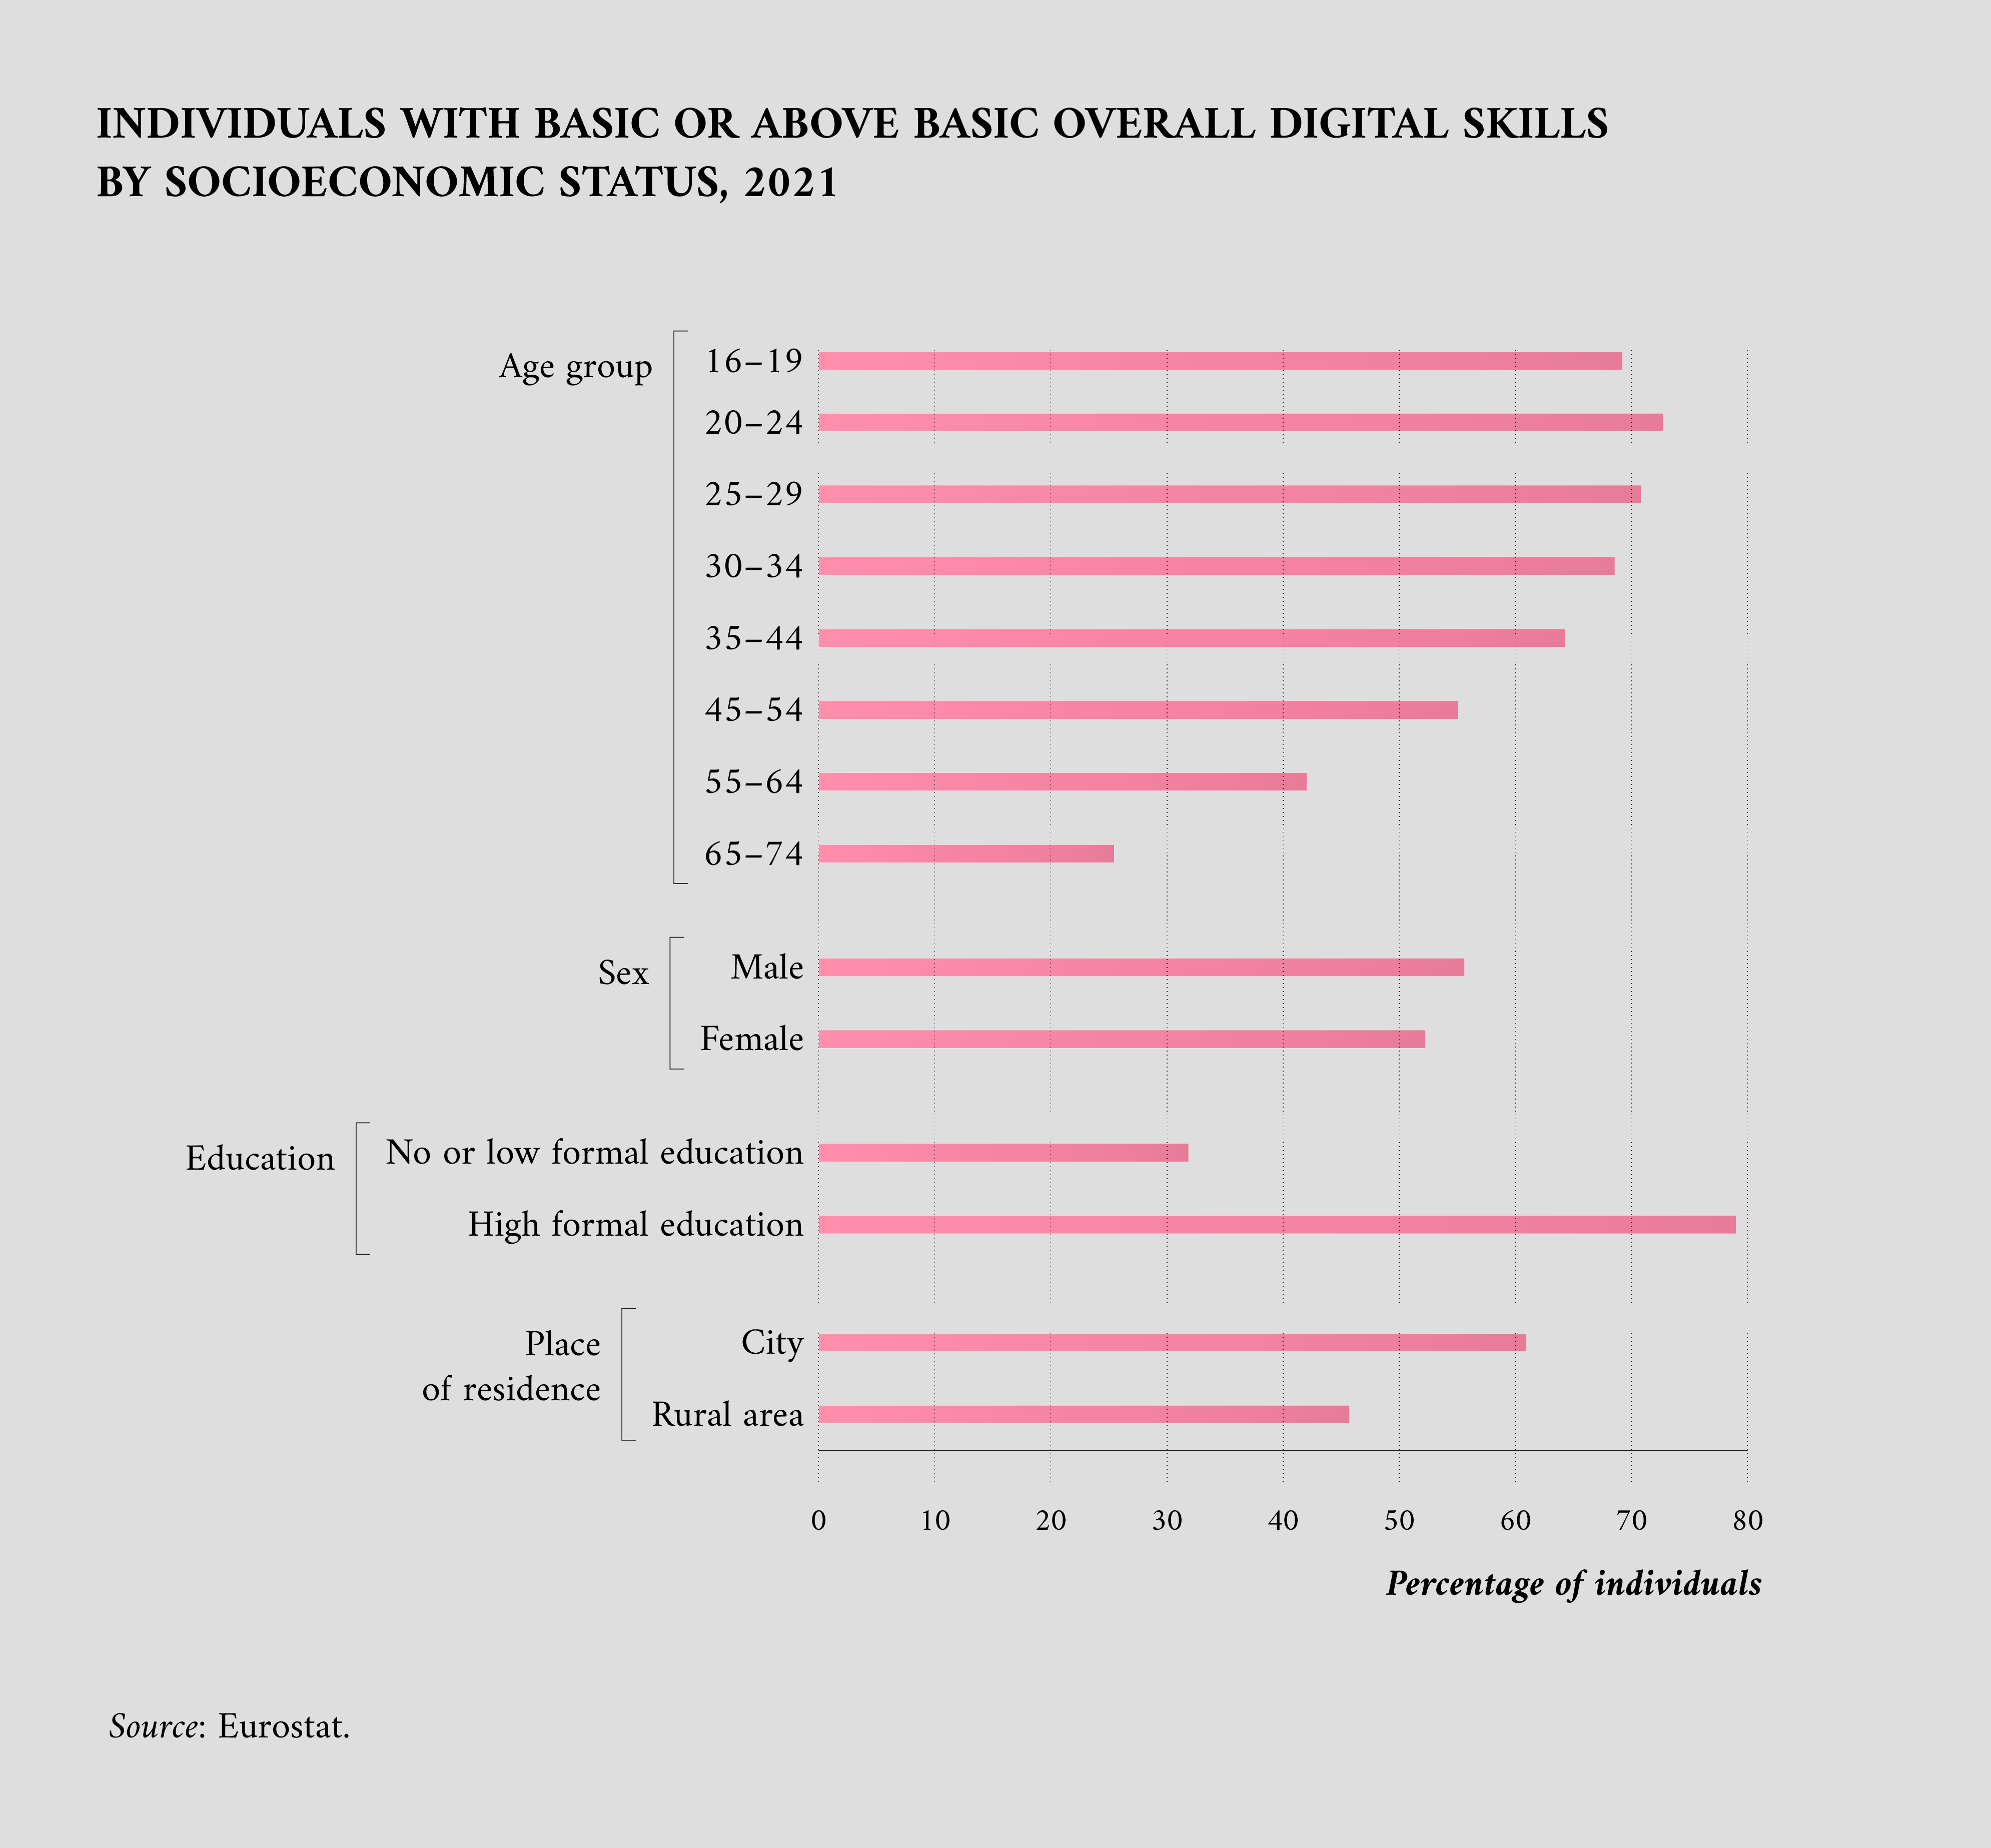 Individuals with basic or above basic digital skills by socioeconomic status, 2021